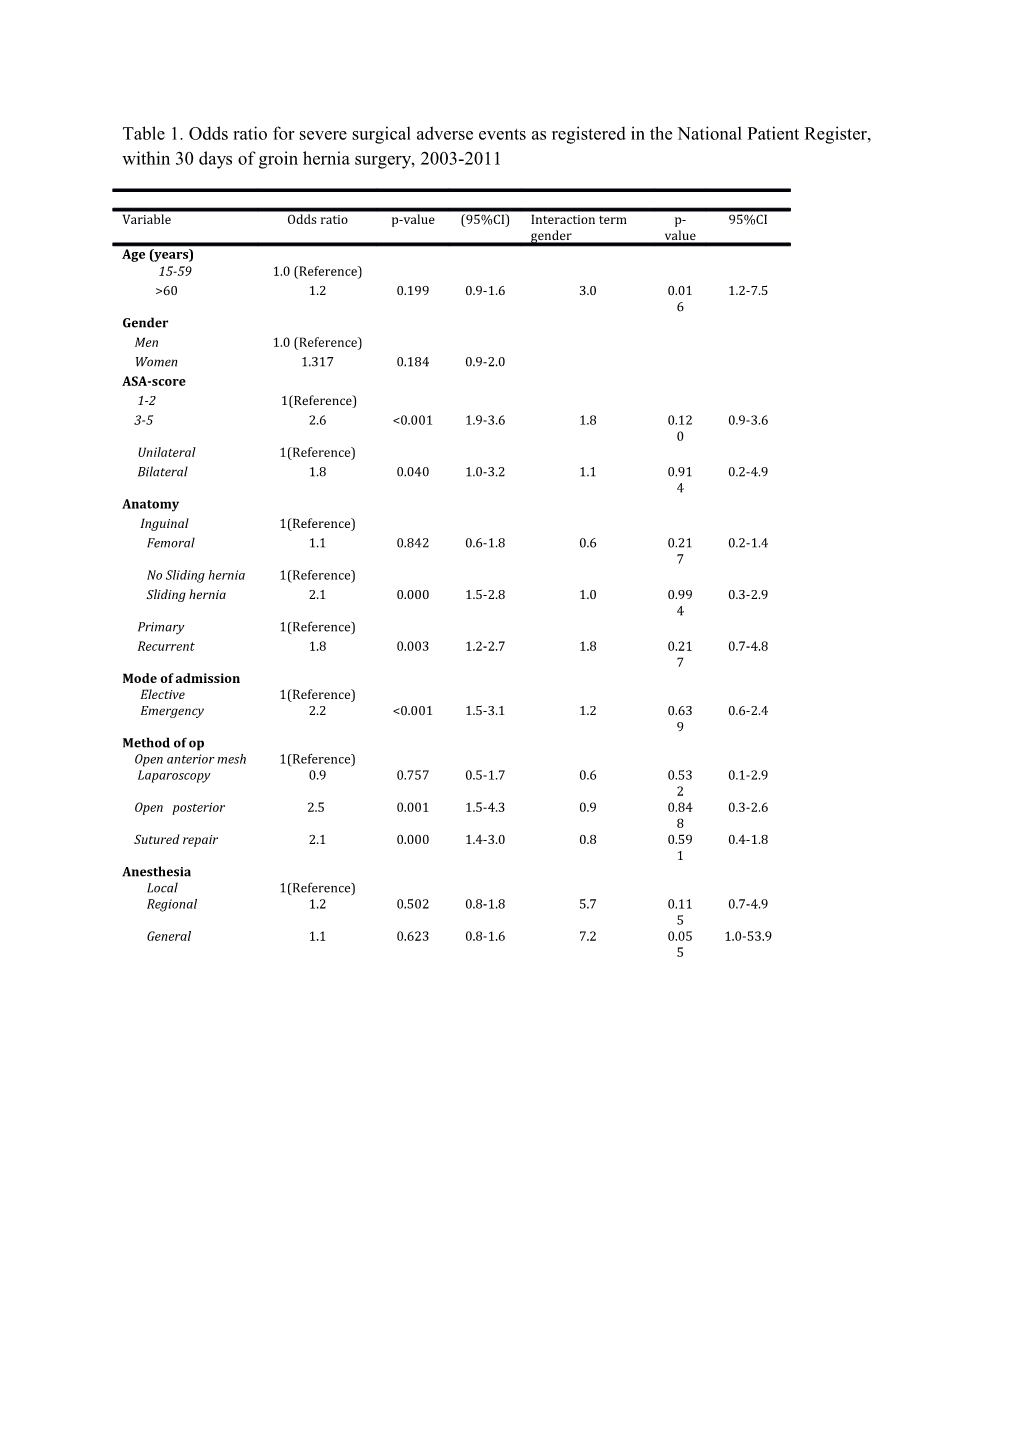 Table 3. Odds Ratio for Perioperative Complications As Registered in the Swedish Hernia